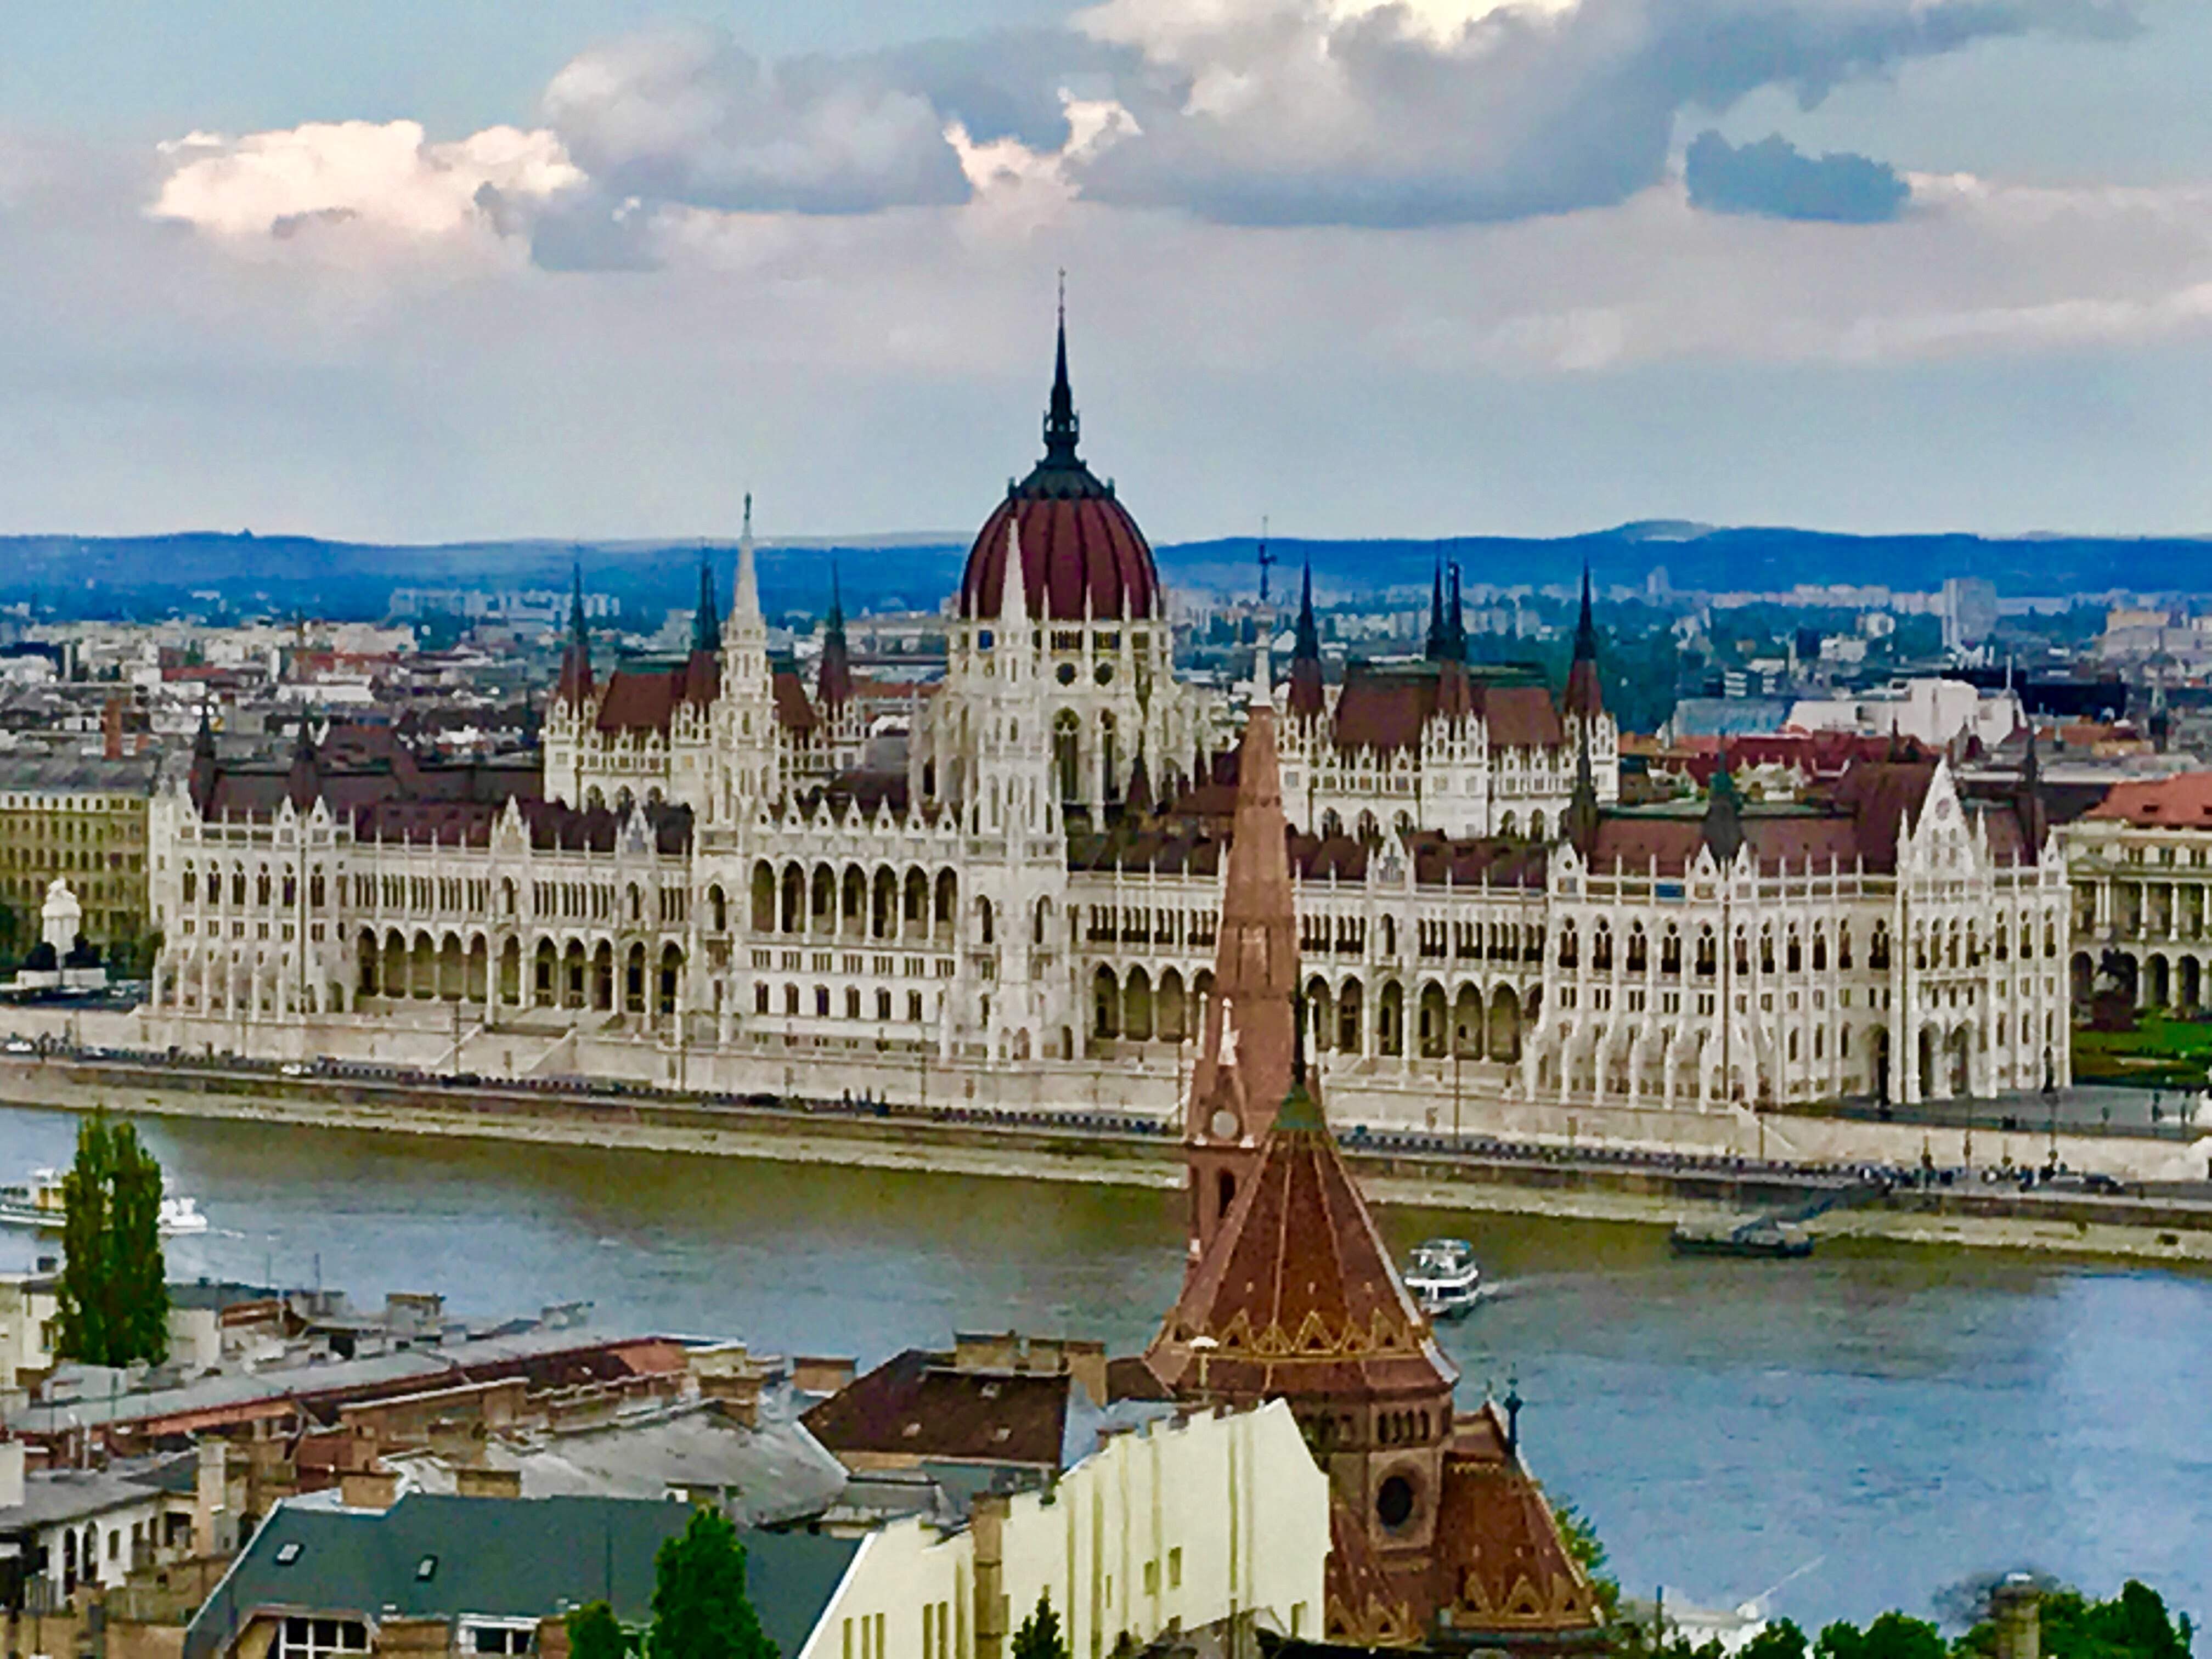 Budapest Parliament on Danube river